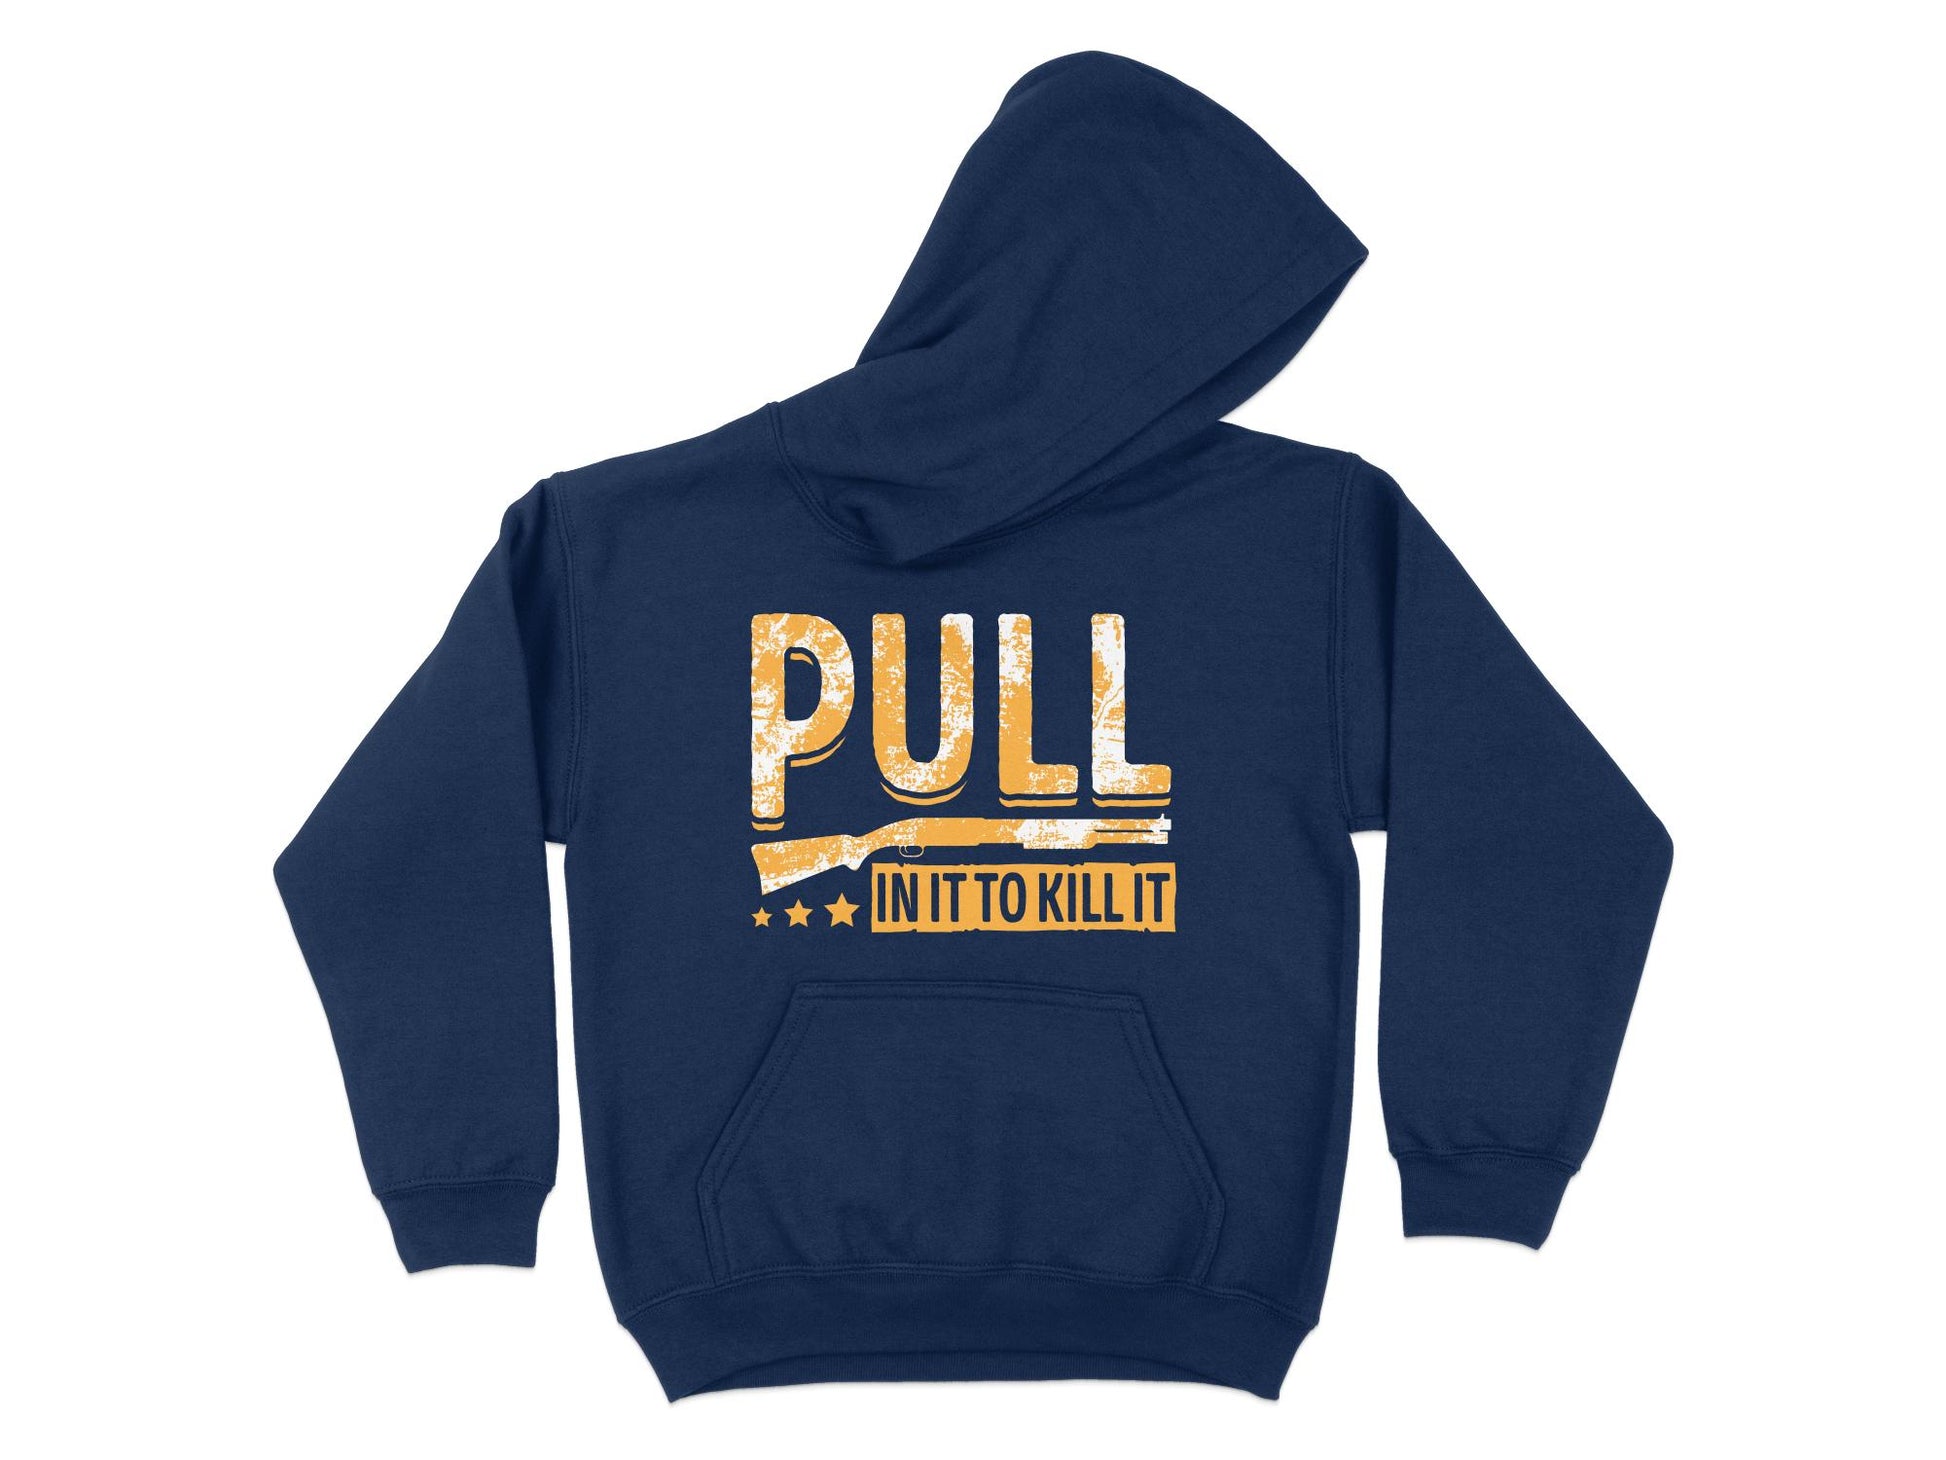 Trap Shooting Hoodie, Pull In It To Kill It, navy blue